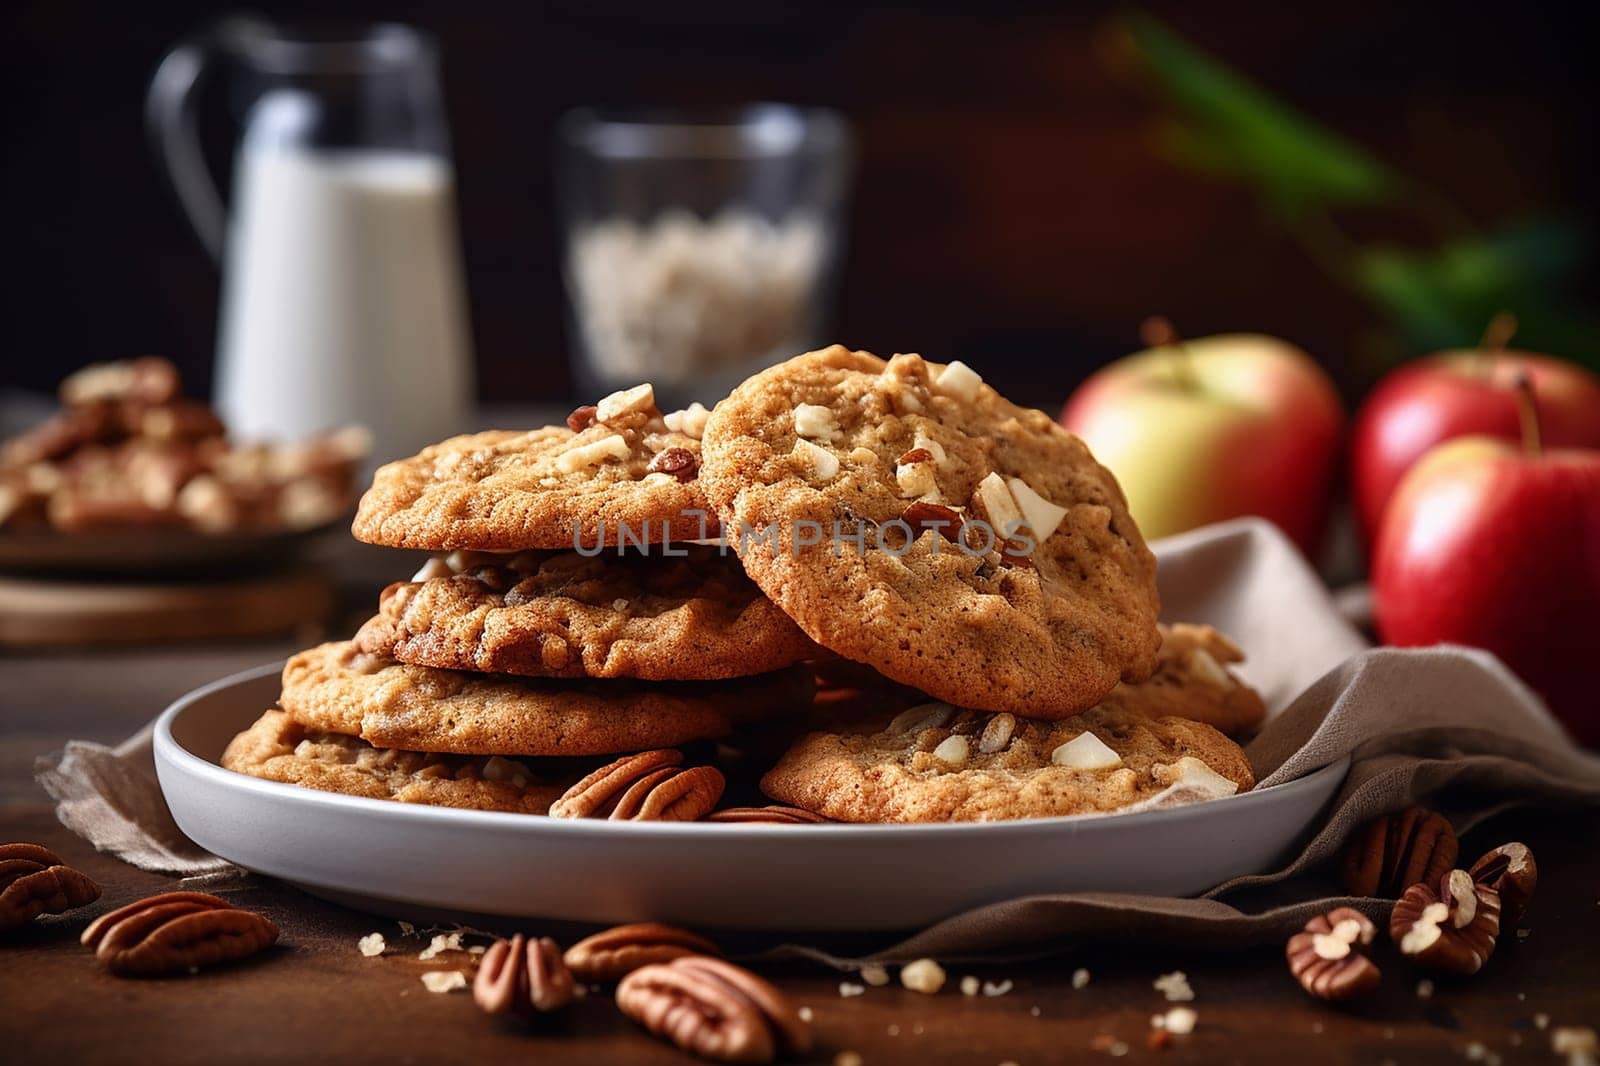 Chocolate chip cookies scattered with chocolate morsels on dark background